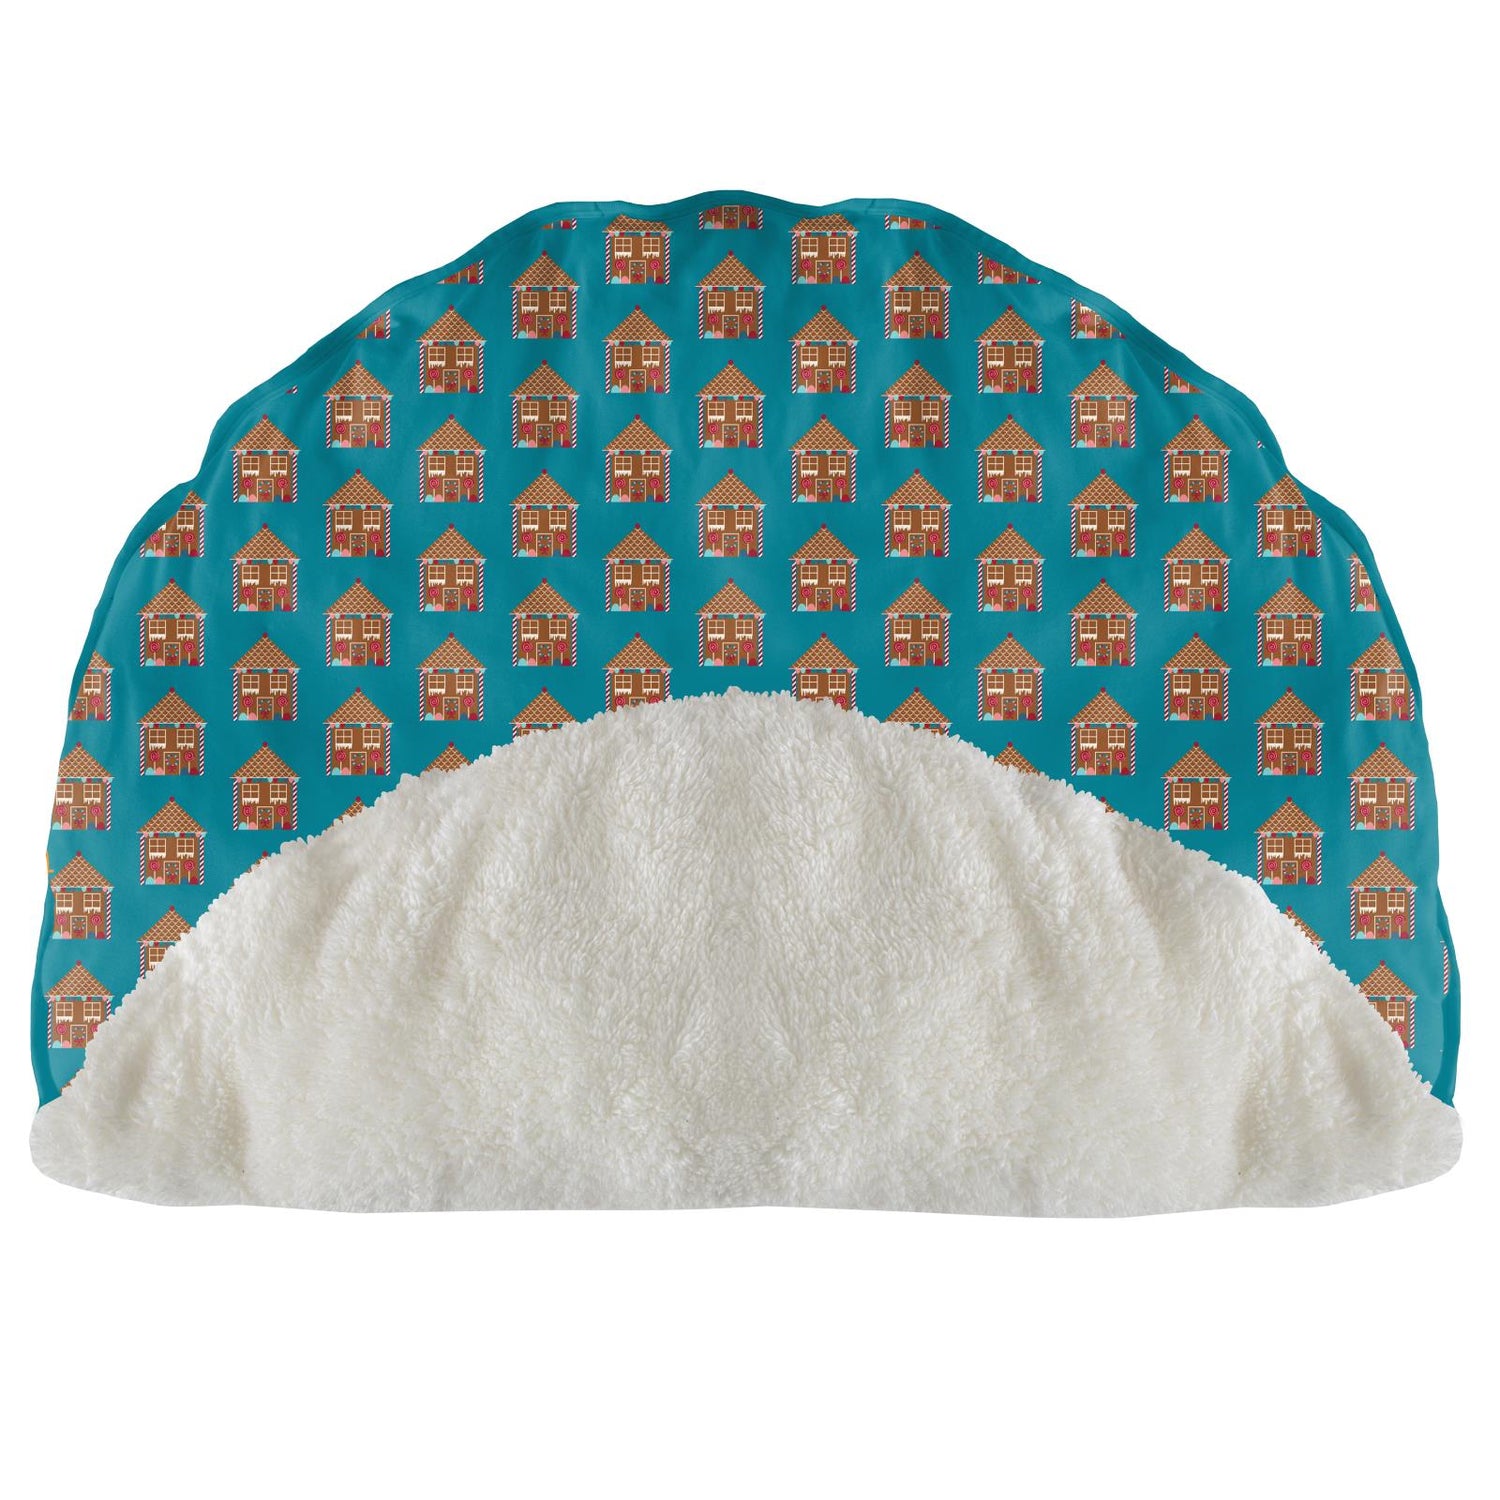 Print Sherpa-Lined Fluffle Playmat in Bay Gingerbread